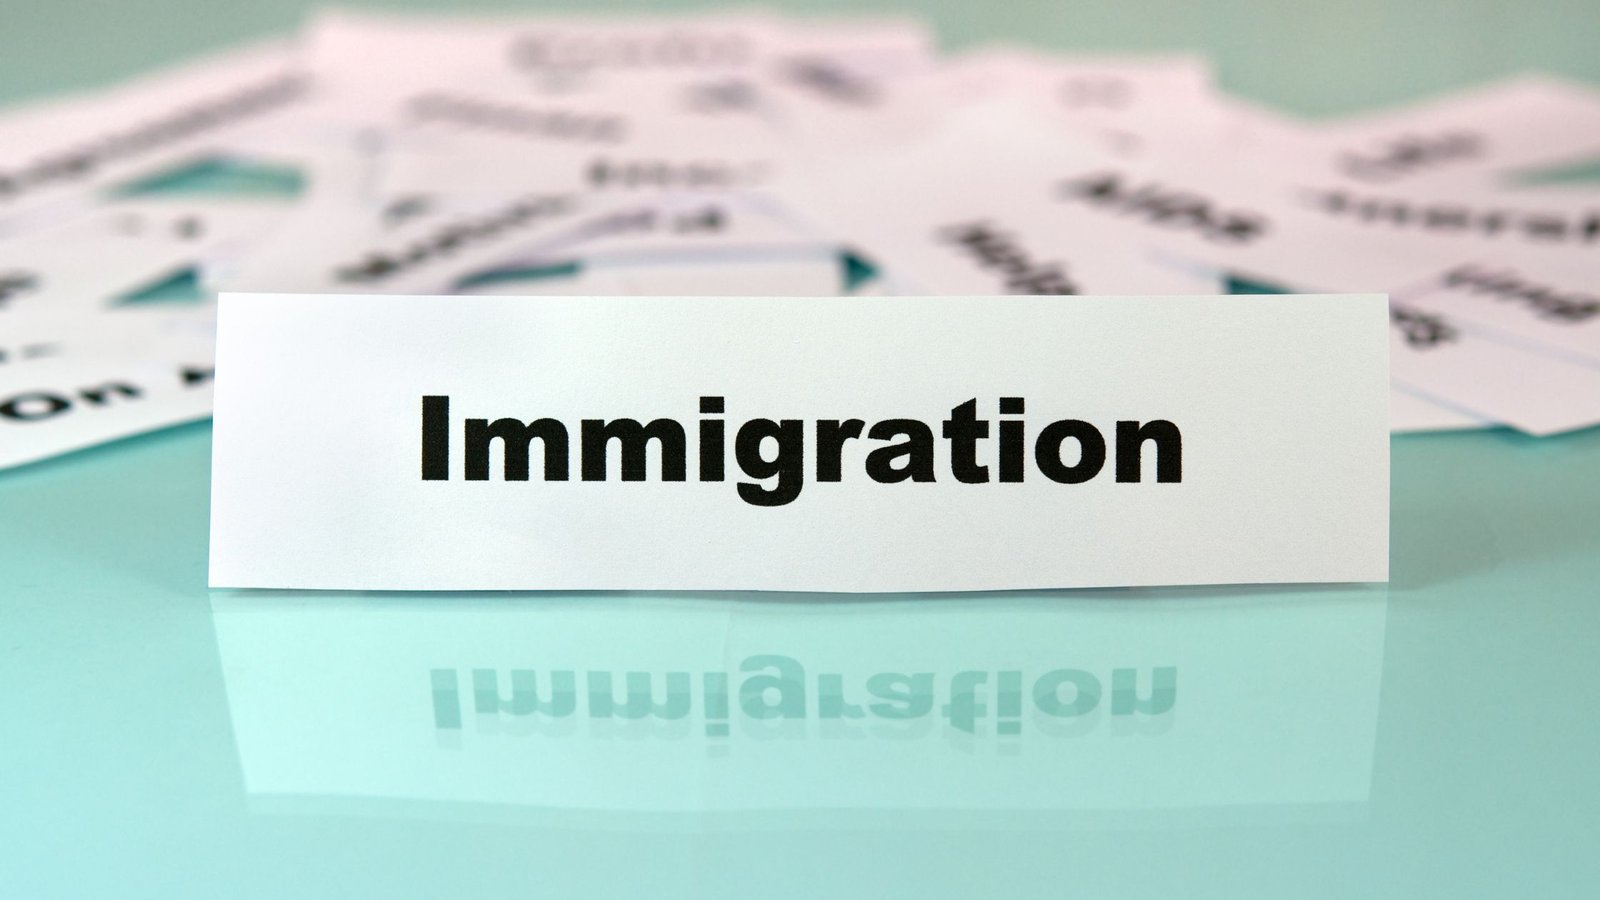 Expert Immigration Legal Services by Neda Zaman